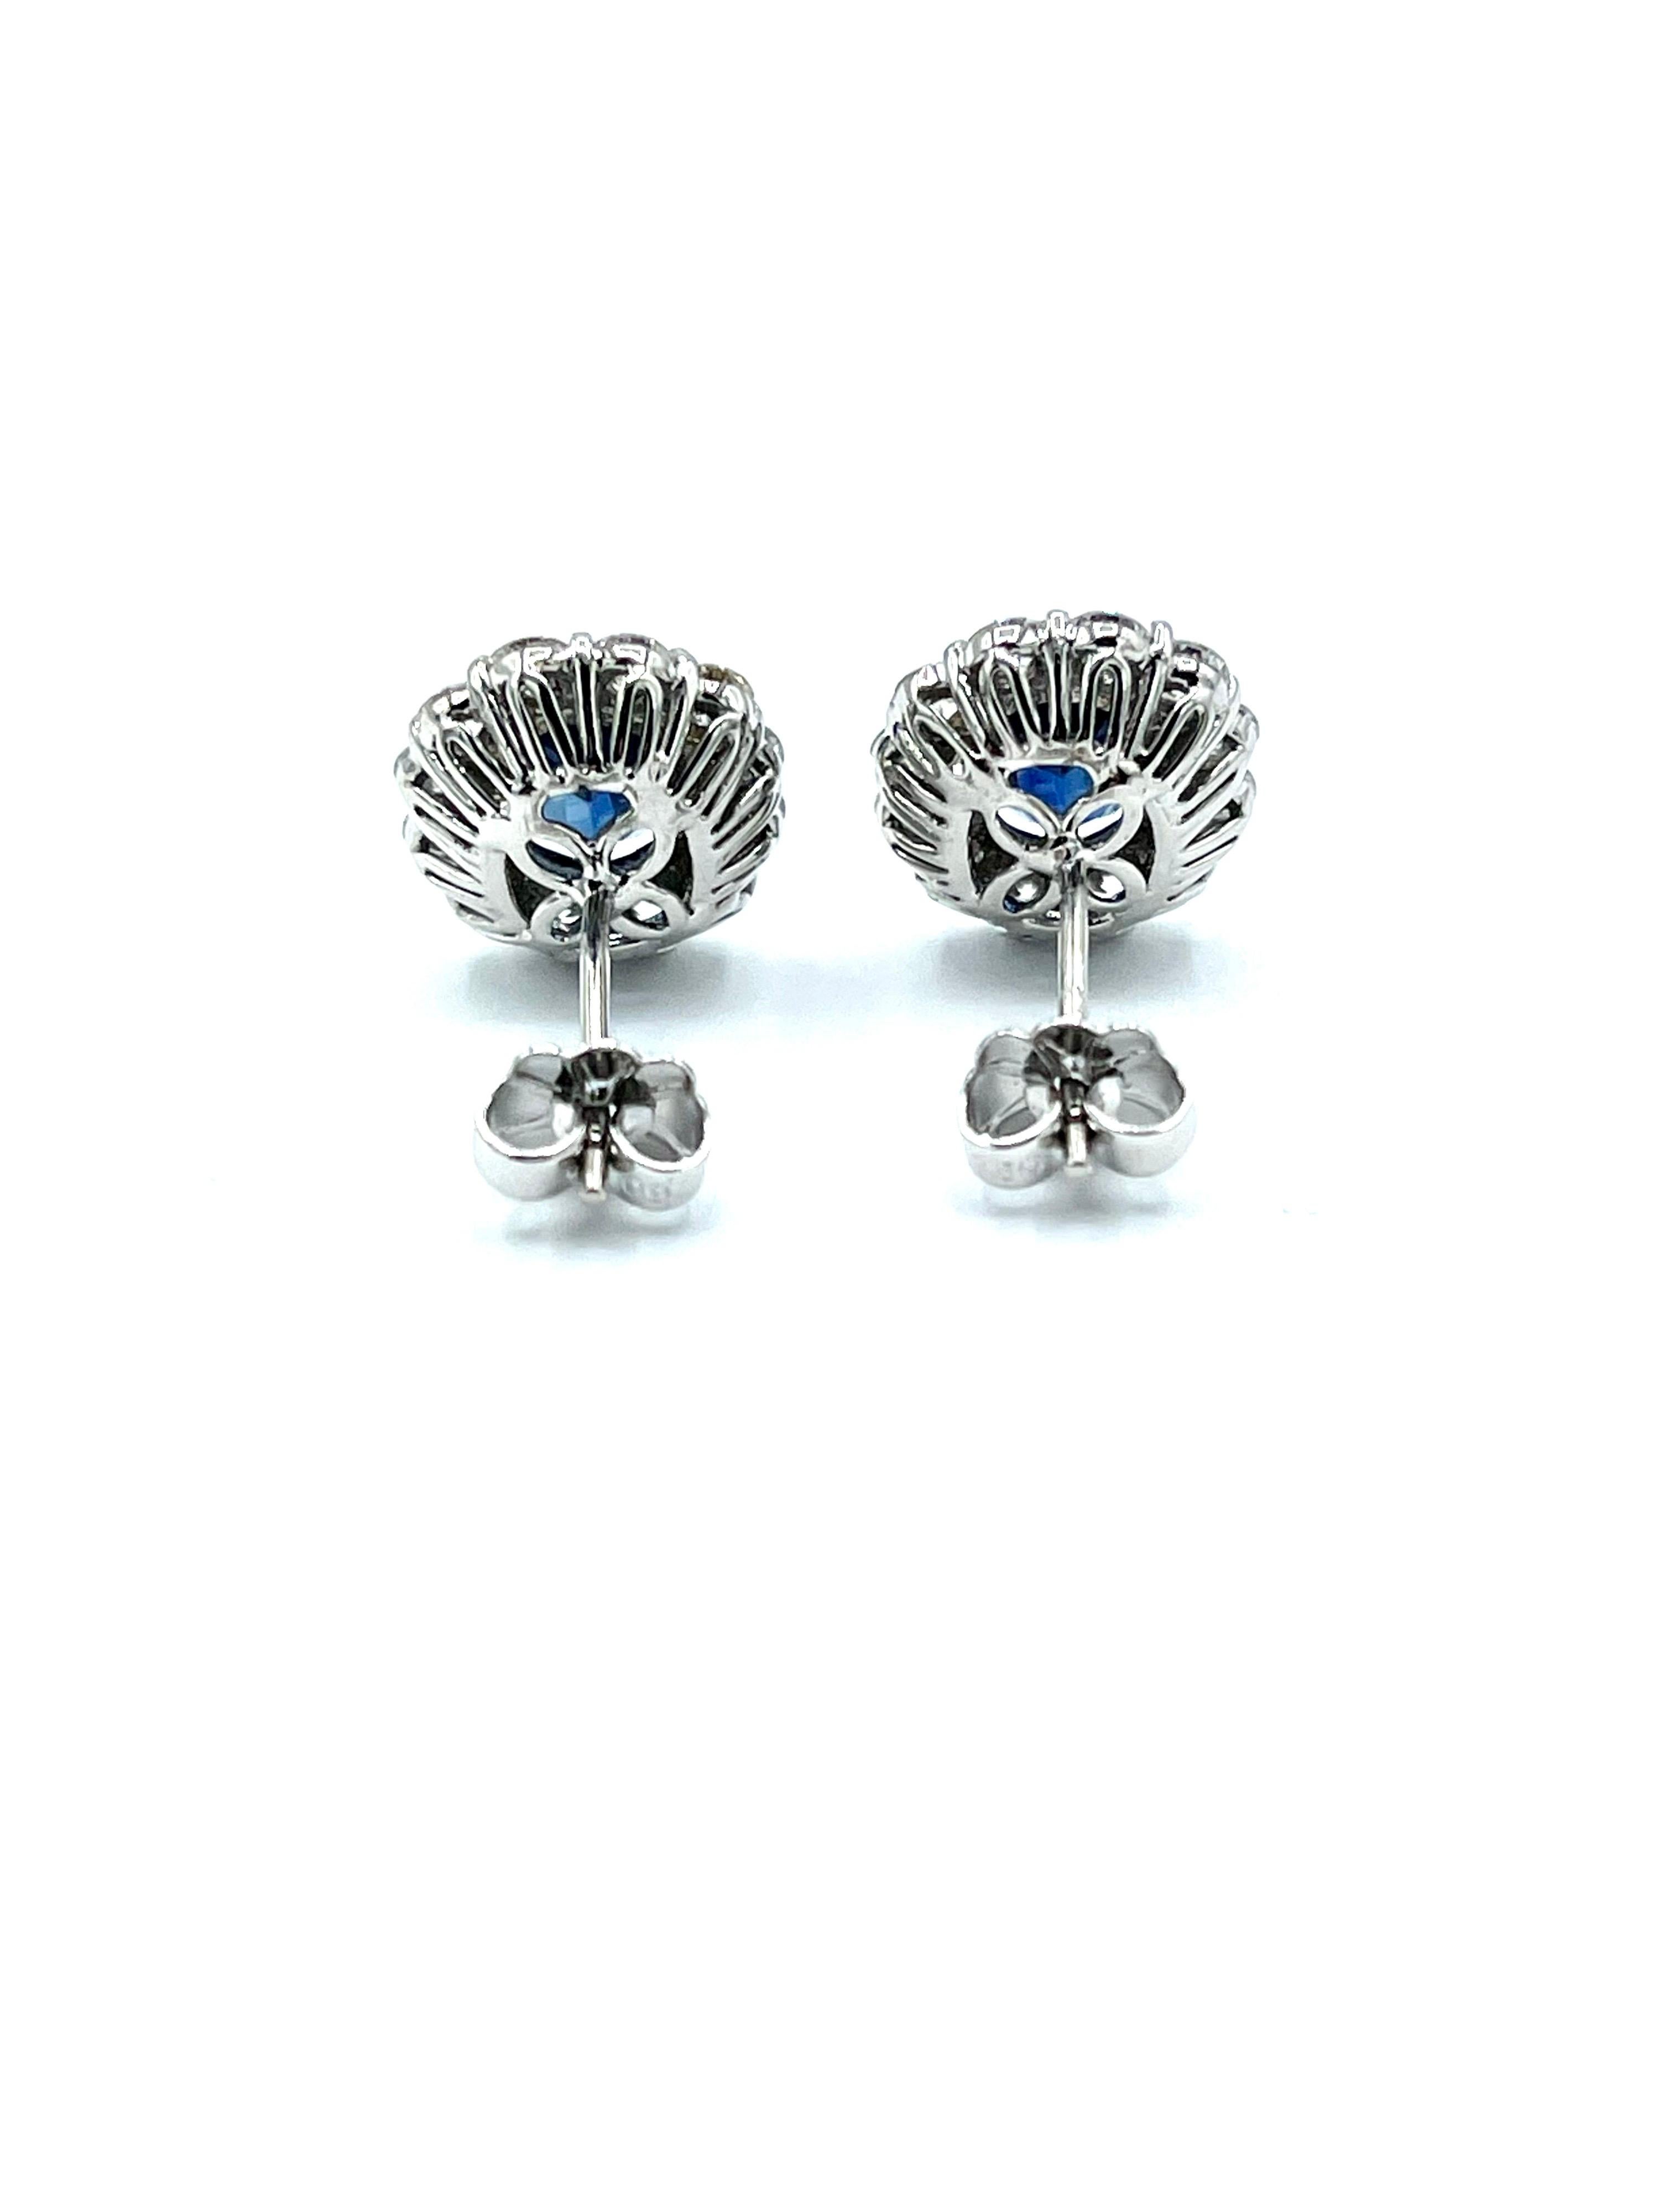 3.16 Carat Oval Sapphires and Round Brilliant Diamond White Gold Stud Earrings In New Condition For Sale In Chevy Chase, MD